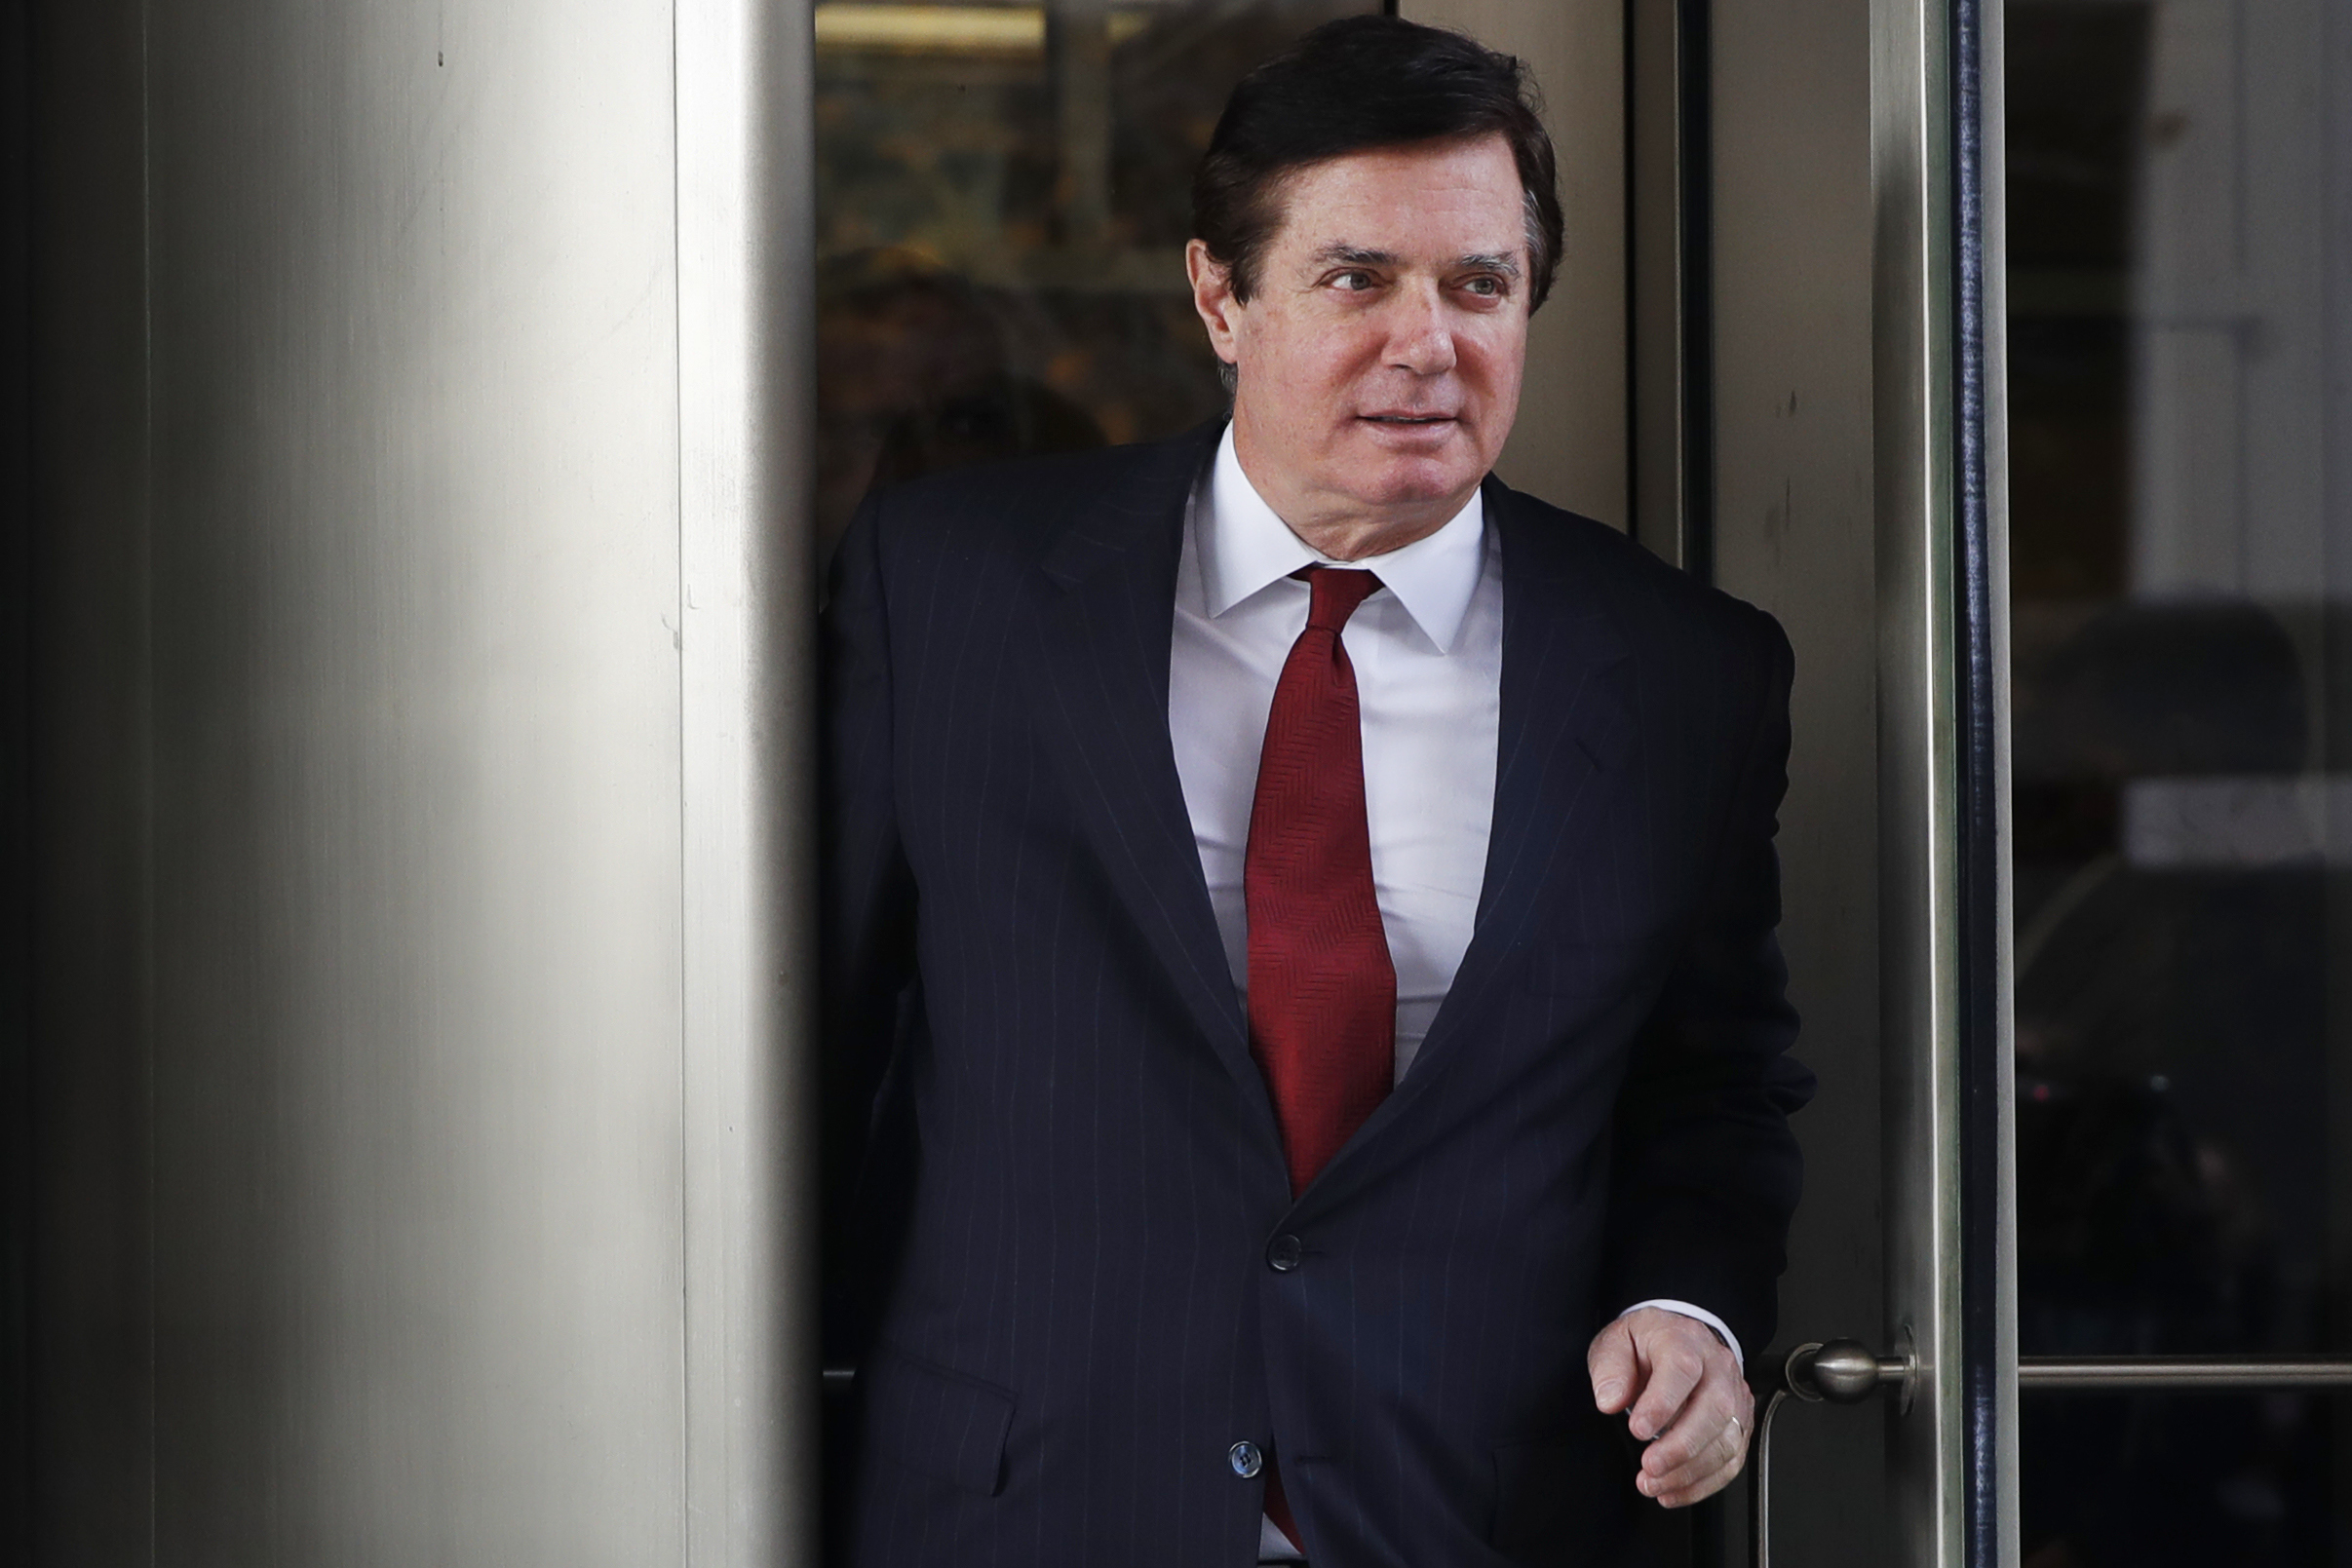 PHOTO: Paul Manafort, President Donald Trump's former campaign chairman, leaves the federal courthouse in Washington, DC, Nov. 6, 2017.